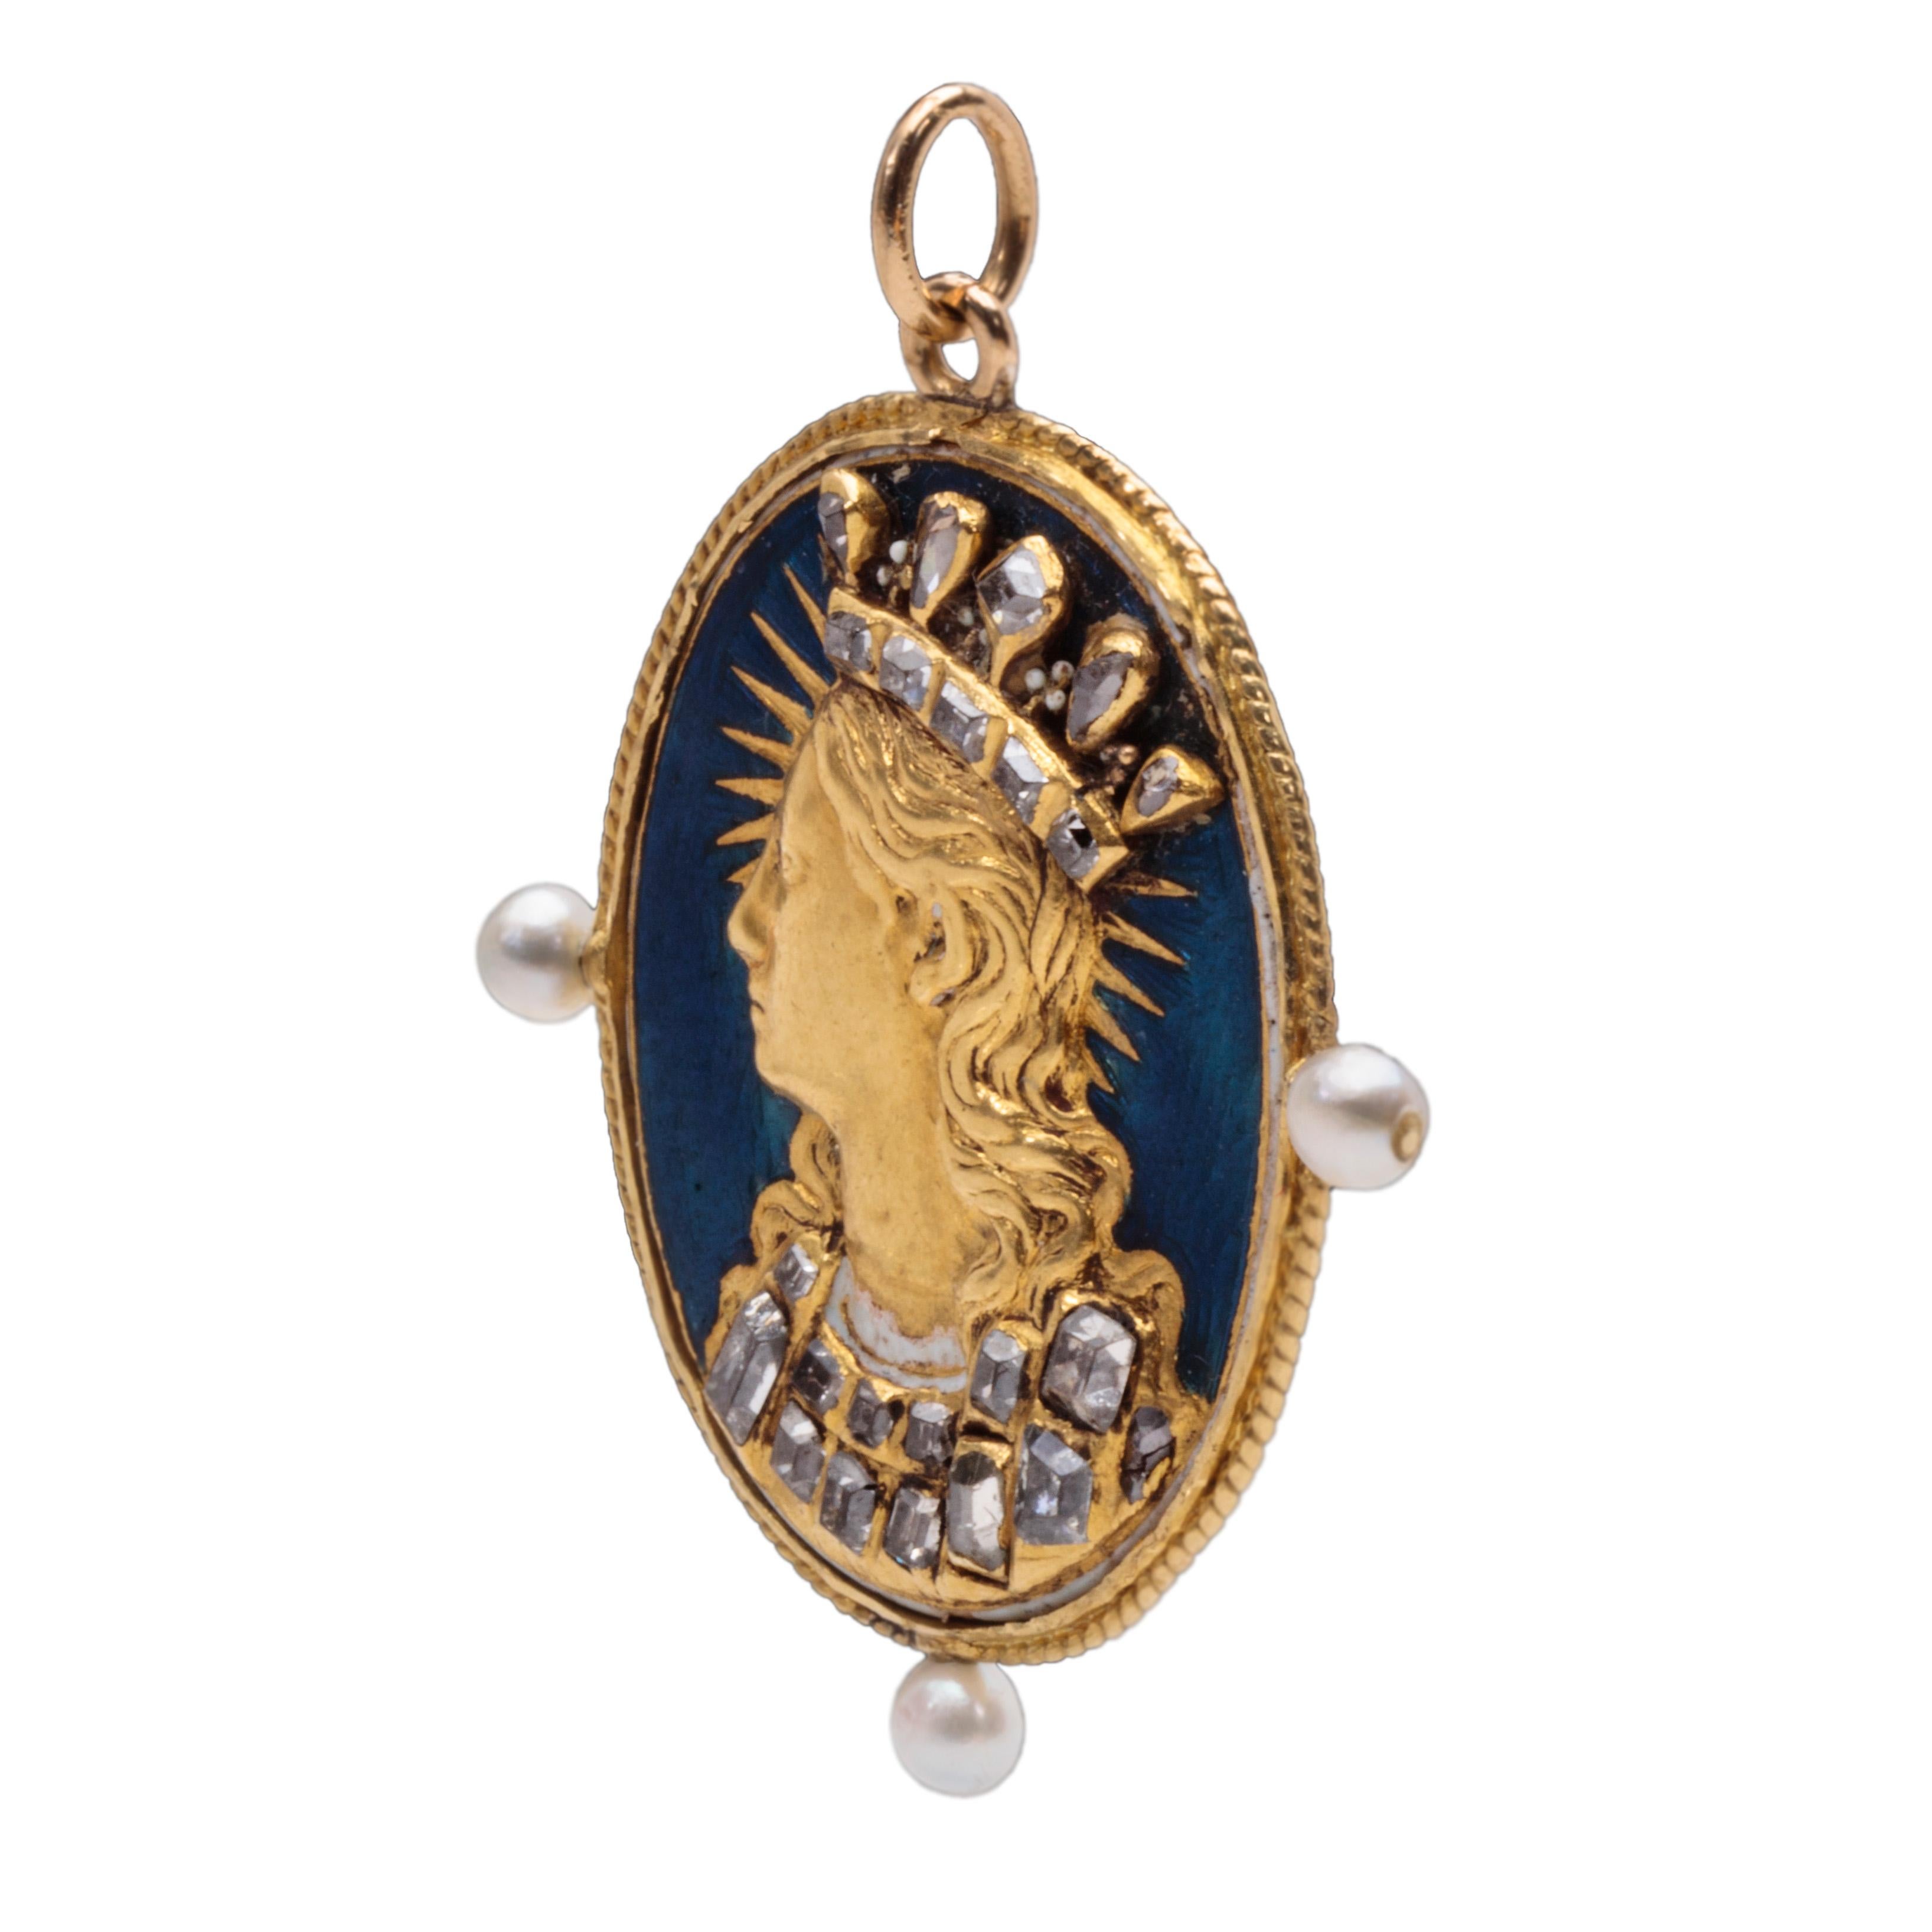 Pendant with Virgin Mary as Queen of Heaven
Western Europe, Southern Germany (?), Italy (?), c. 1550-1560
Gold, enamel, diamonds, and pearls
Weight 13.2 gr; Length 36.9 x 31.2 mm (incl. pearls)

This sumptuous image exudes regal power. It portrays